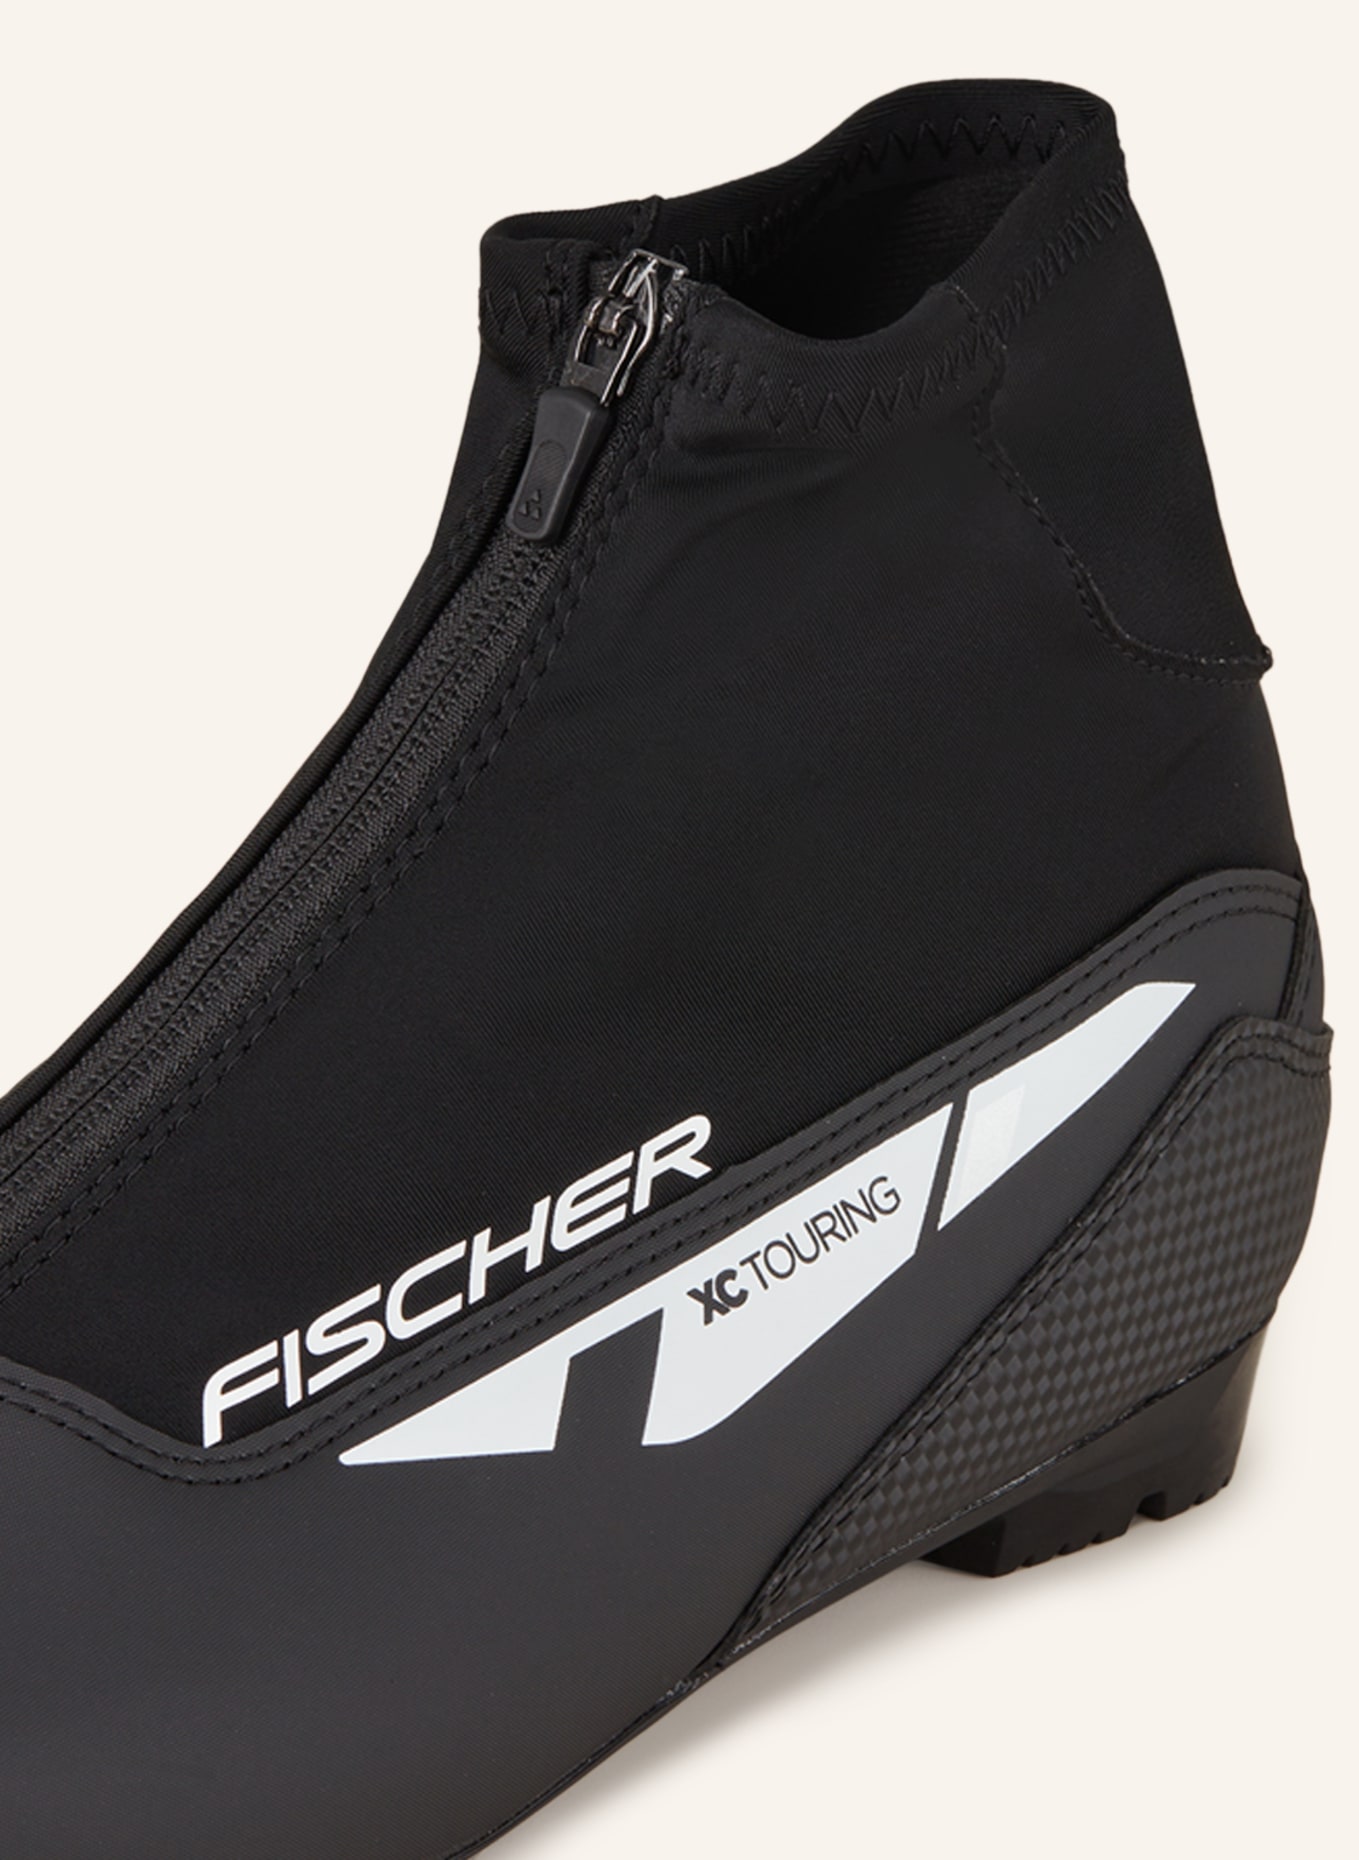 FISCHER Cross-country ski boots XC TOURING, Color: BLACK (Image 5)